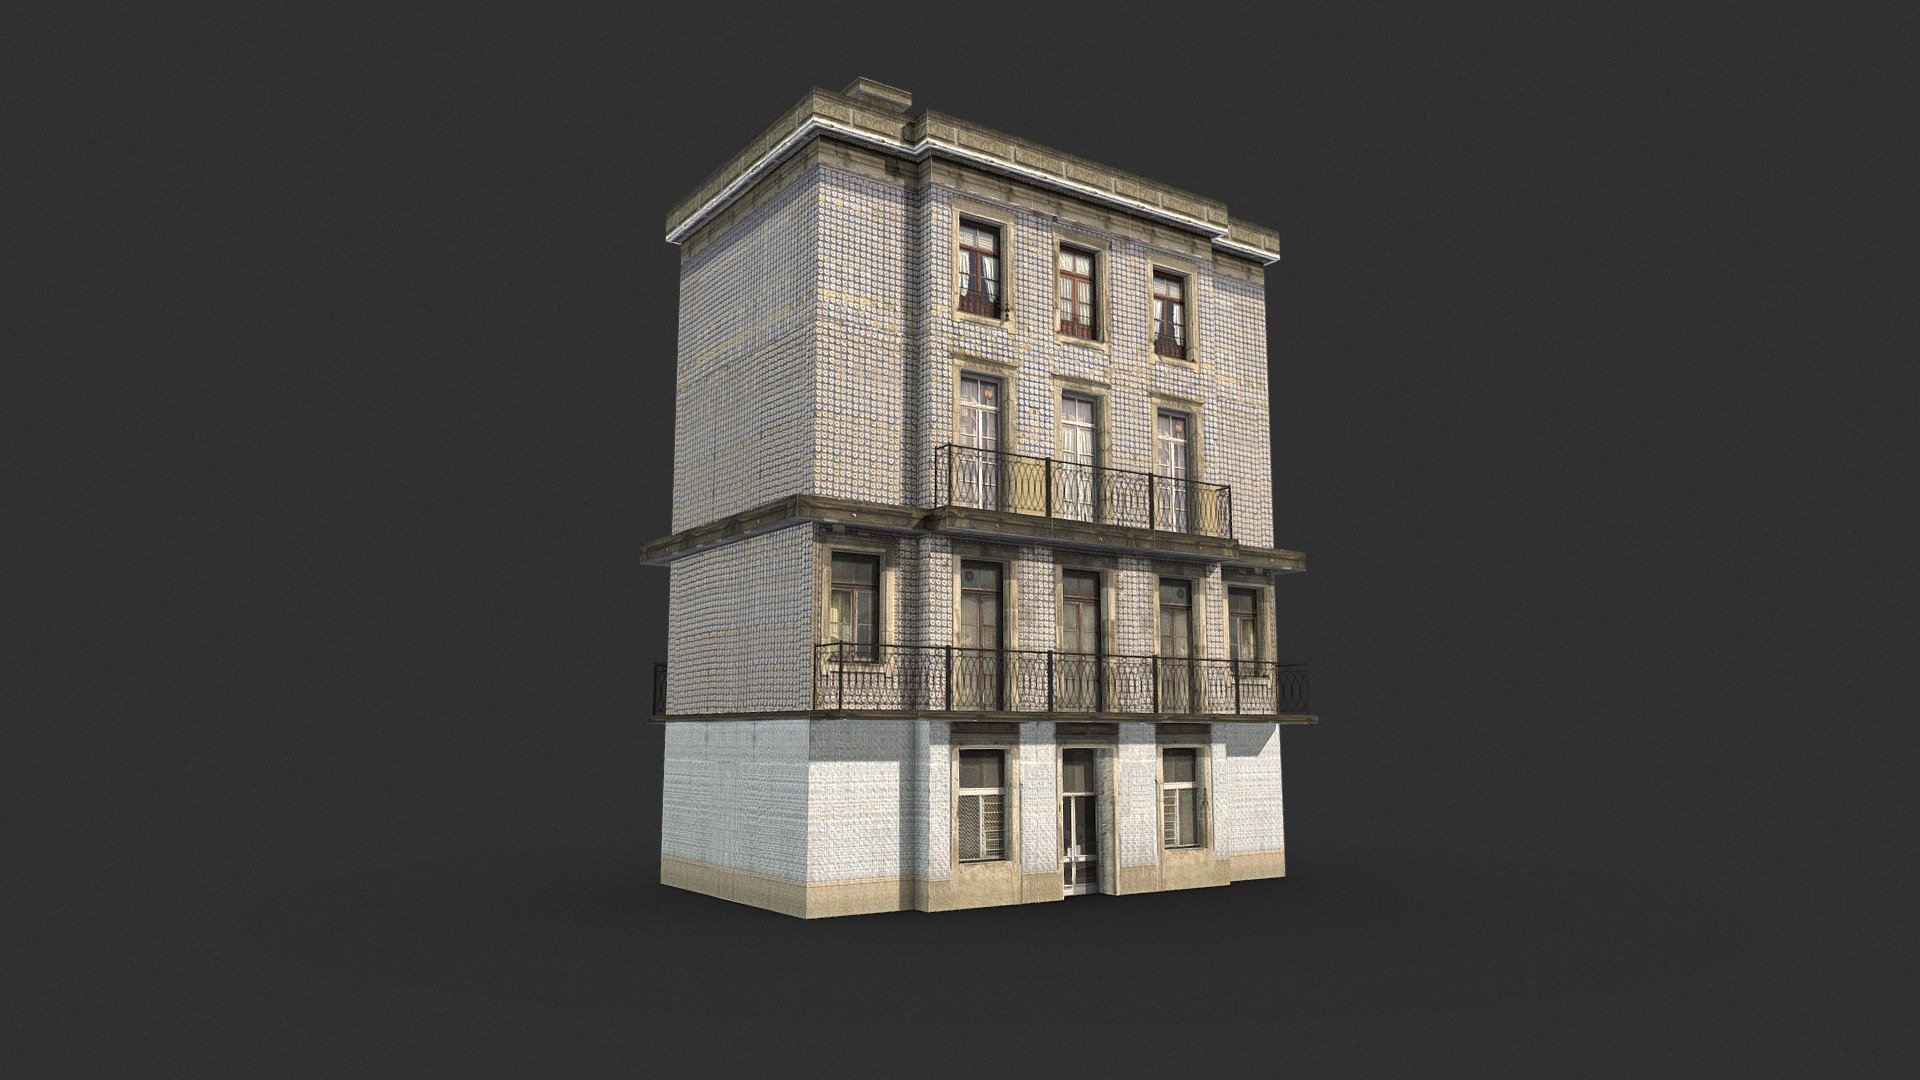 3D model of Old Apartment House

Resolution of textures:  512x1024, 700x700(roof), 1000x1000 (balcony)
Originally created with 3ds Max 2017
Photorealistic Texture
Unit system is set to centimetre.
Model is built to real-world scale
Rendered in Vray and 

Special notes:
.fbx format is recommended for import in other 3d software. If your software doesn't support .fbx format, please use .3ds format; .obj, format was exported from 3ds Max 3d model